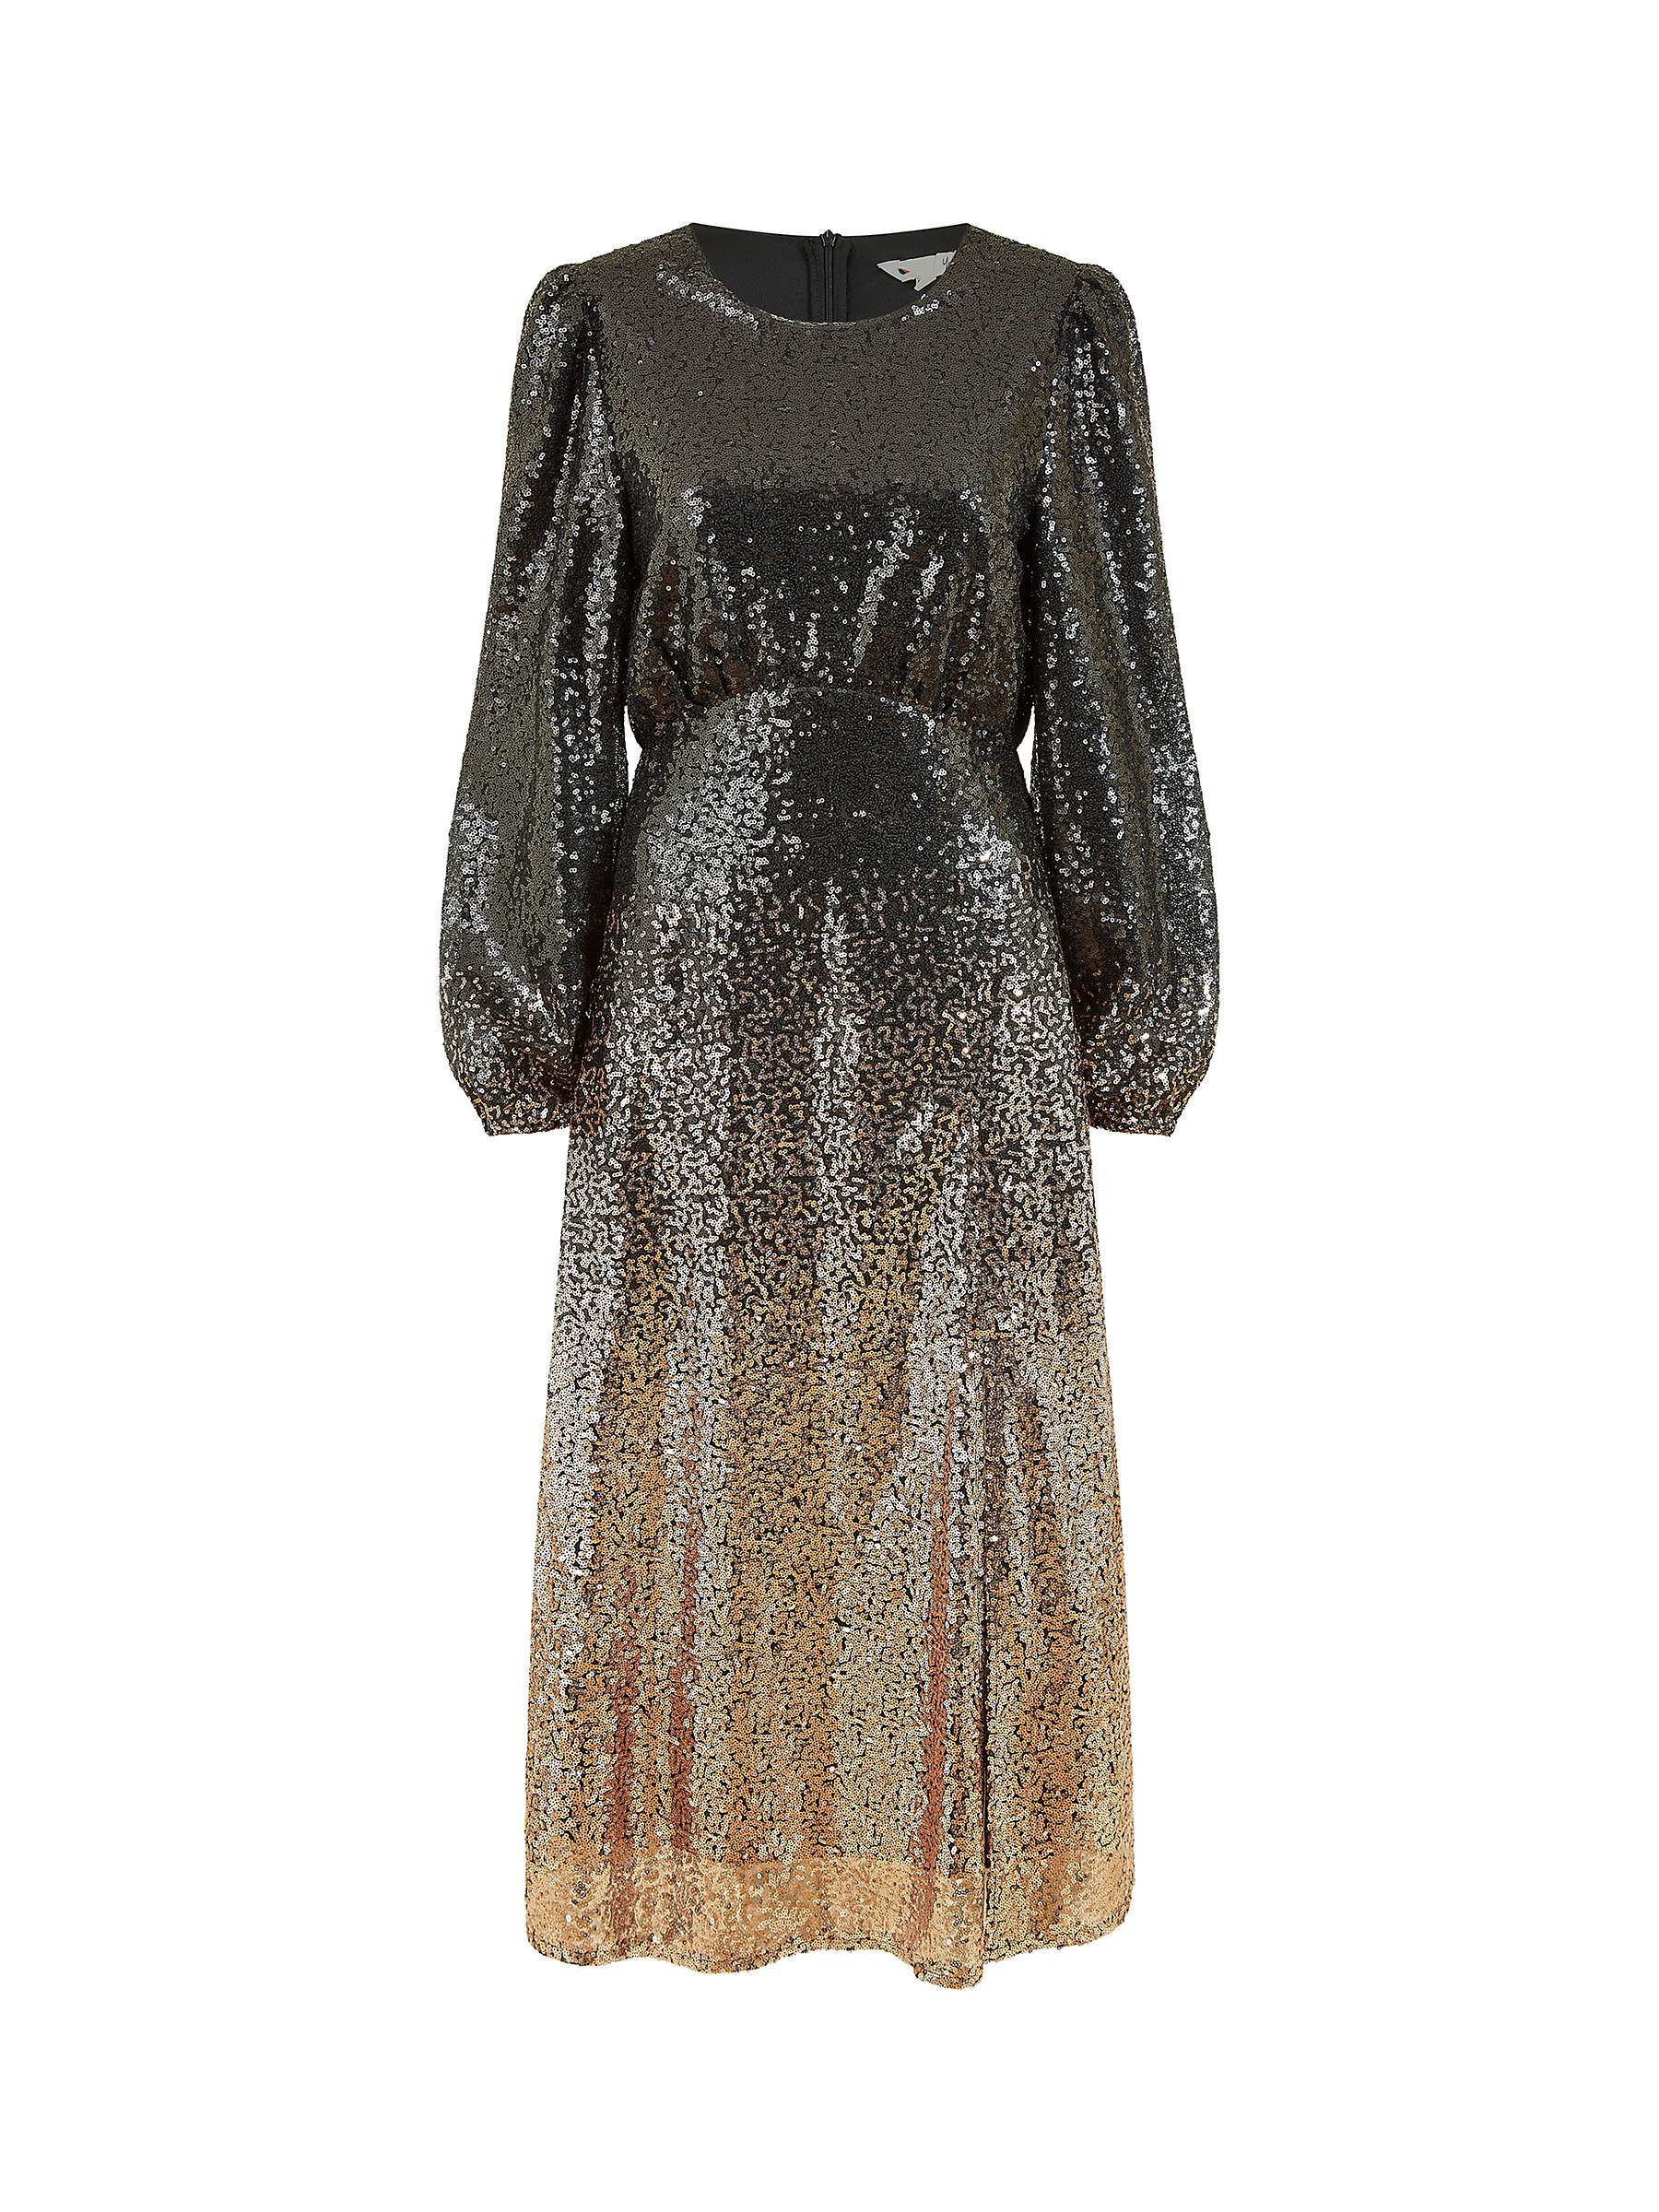 Buy Yumi Sequin Ombre Long Sleeve Midi Dress Online at johnlewis.com